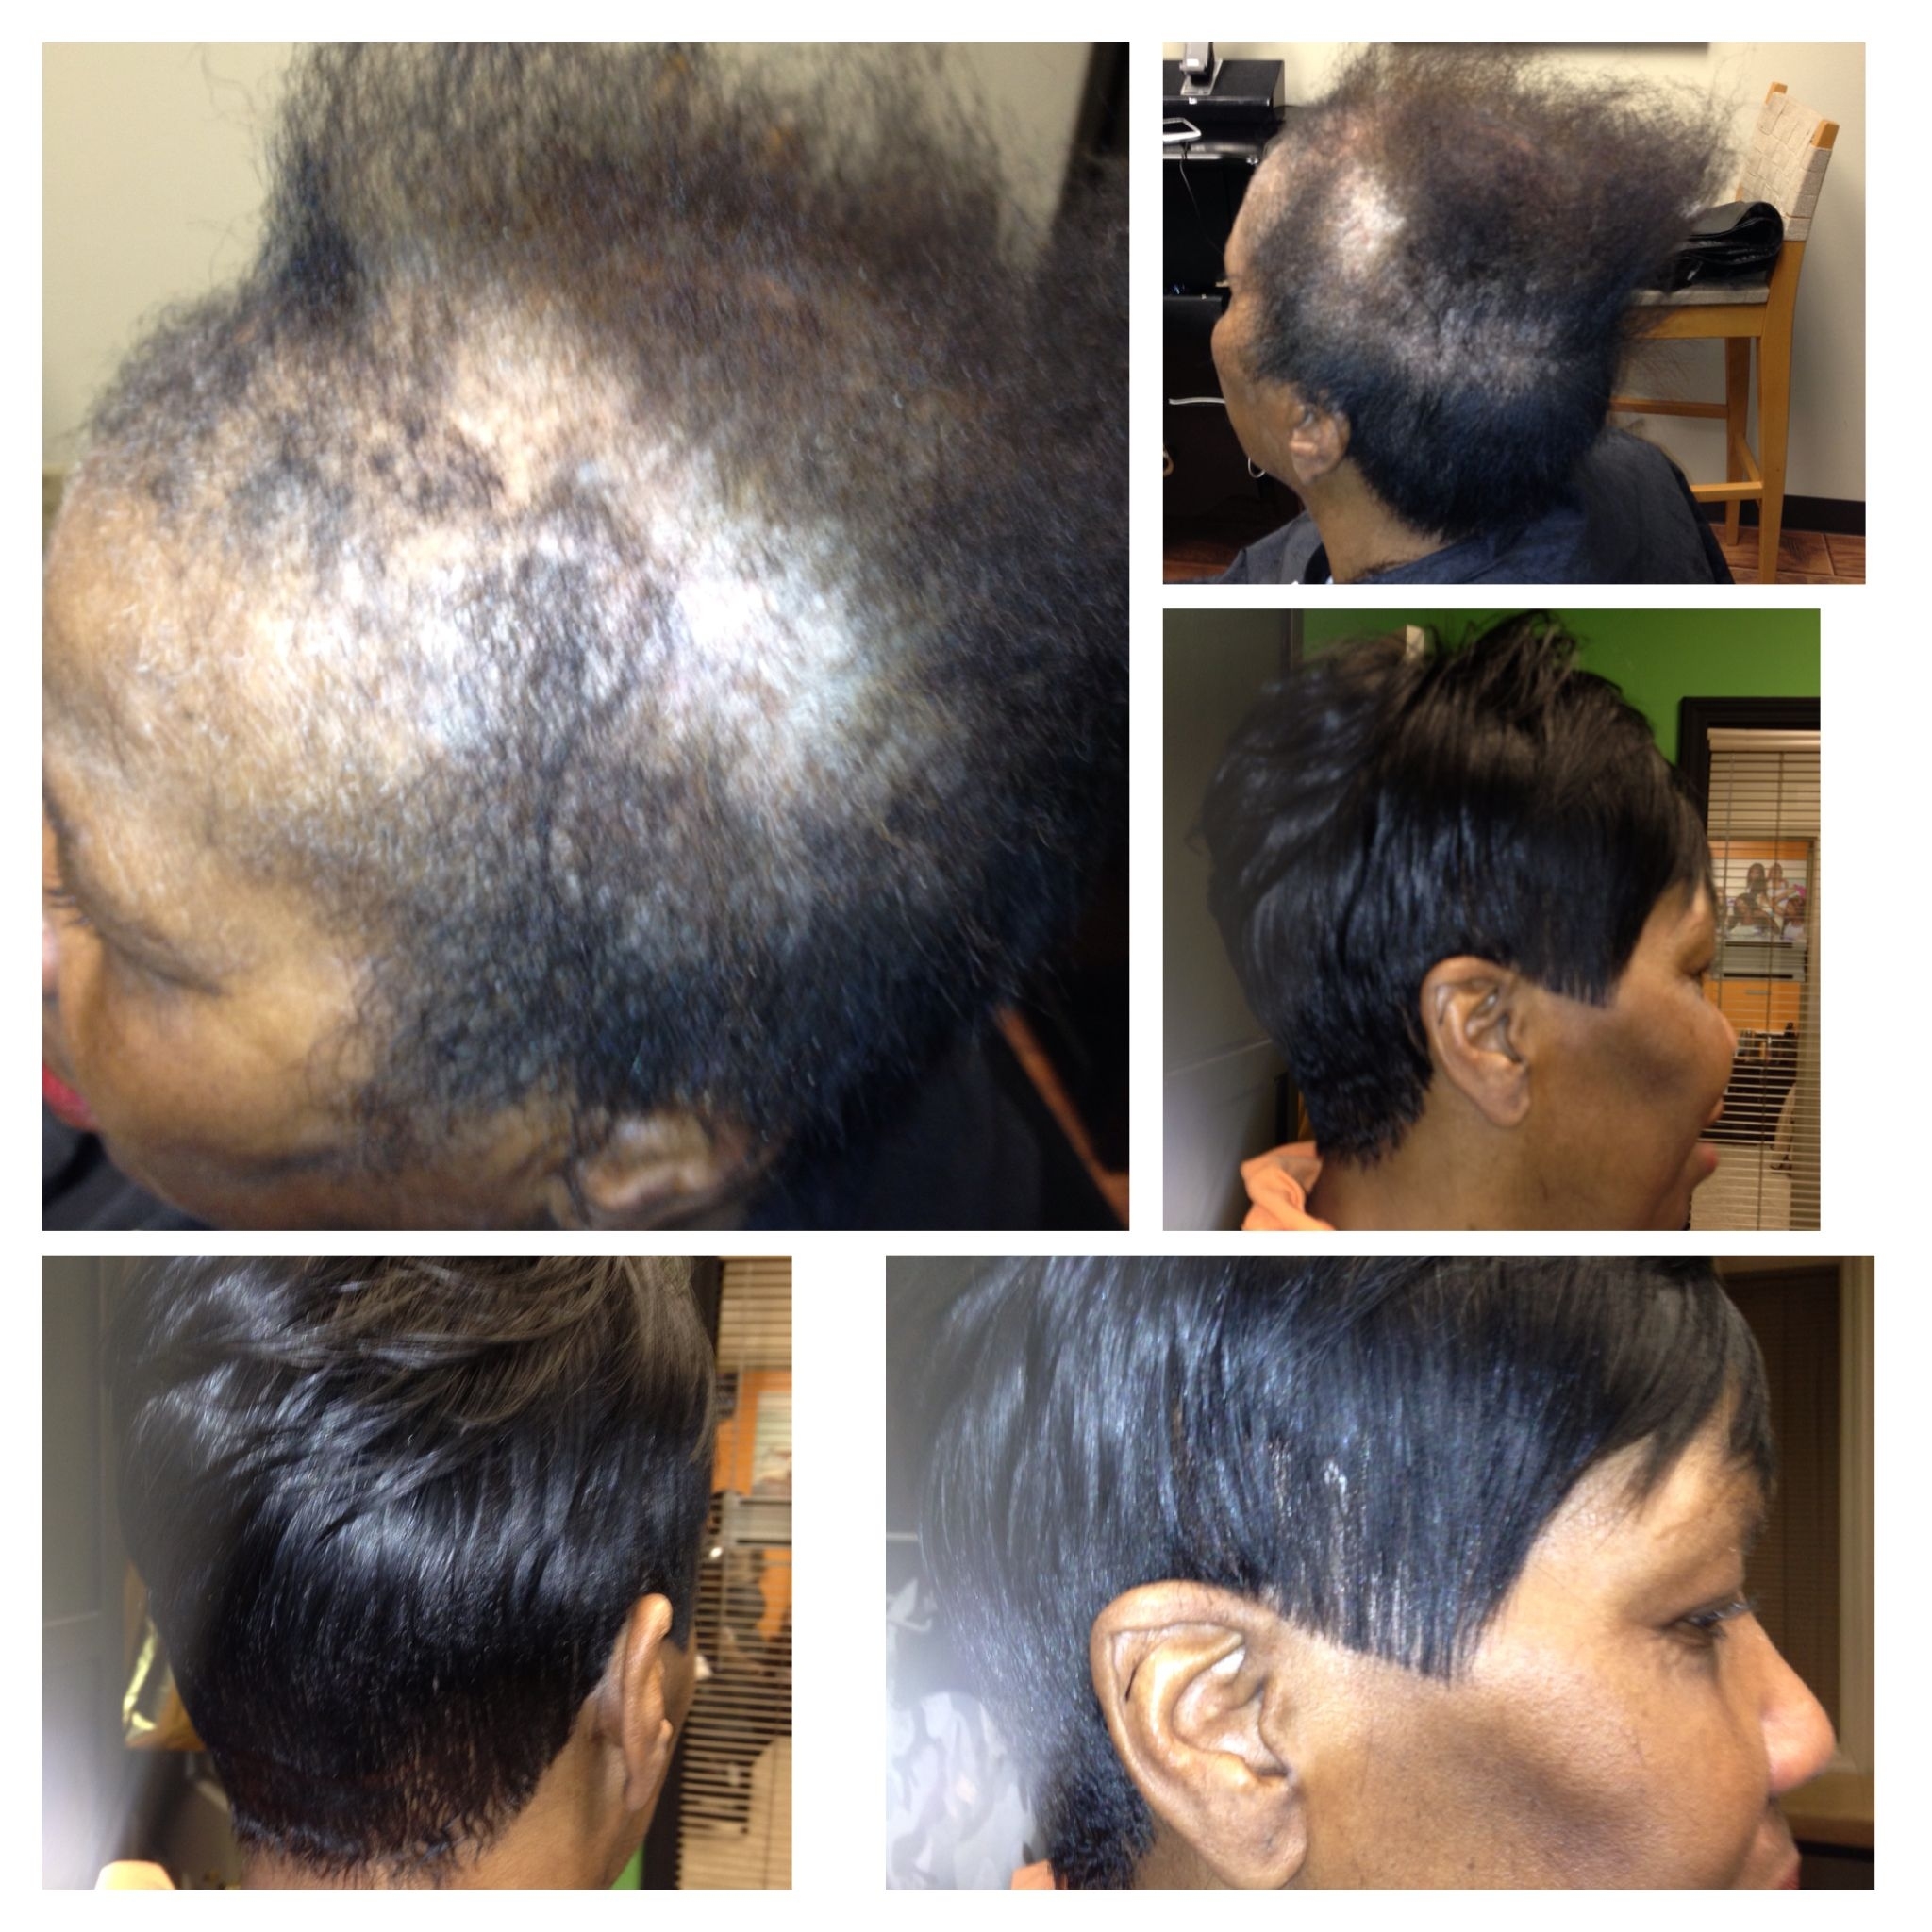 Full Custom Sewin 'no Glue' Natural Looking Sewin Thinning with Hair Styles For Those With Alopecia